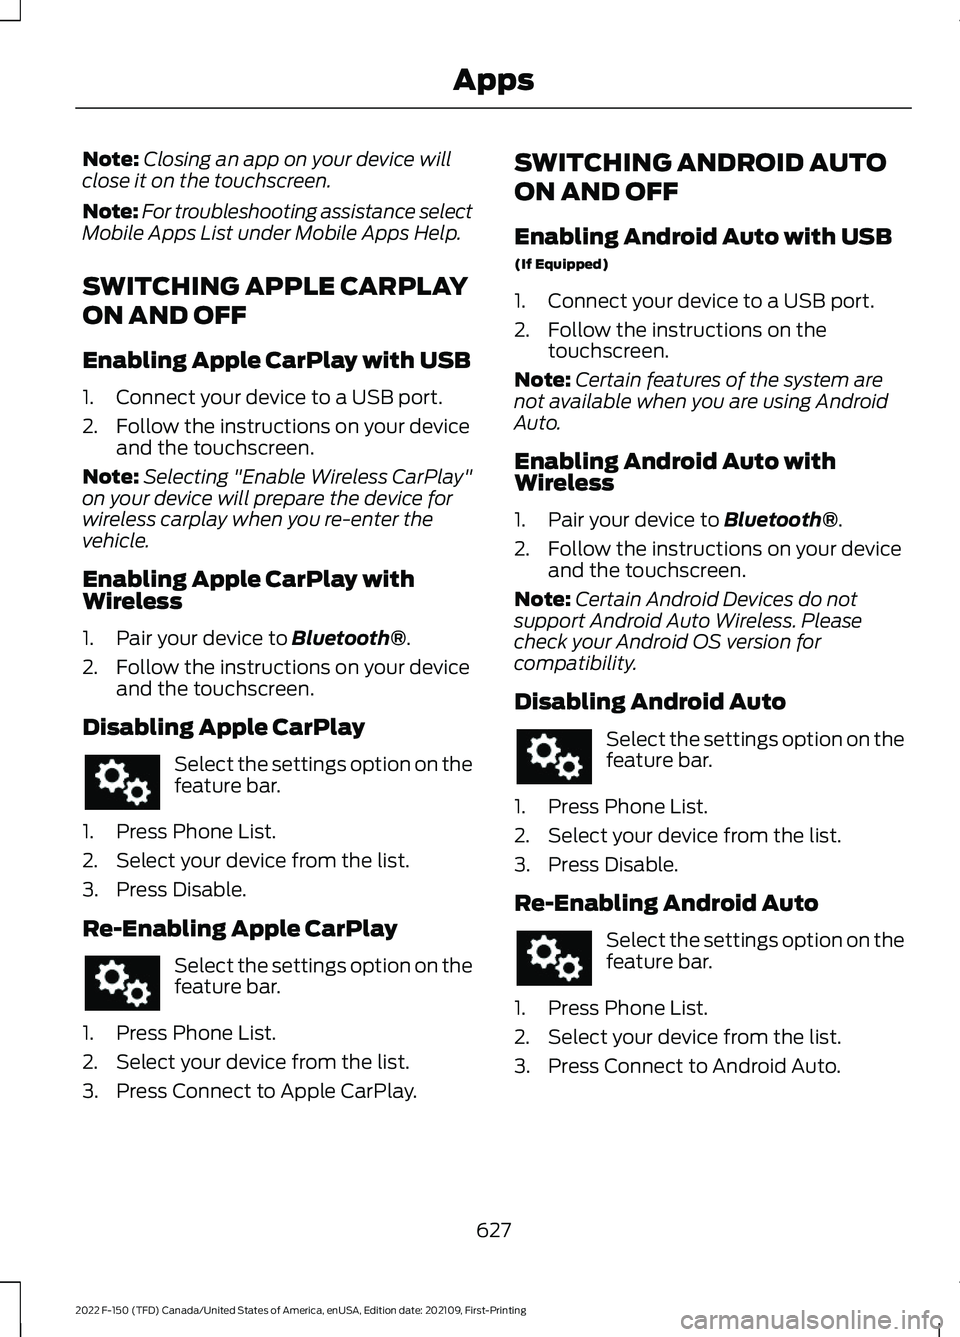 FORD F-150 2022  Owners Manual Note:
Closing an app on your device will
close it on the touchscreen.
Note: For troubleshooting assistance select
Mobile Apps List under Mobile Apps Help.
SWITCHING APPLE CARPLAY
ON AND OFF
Enabling A